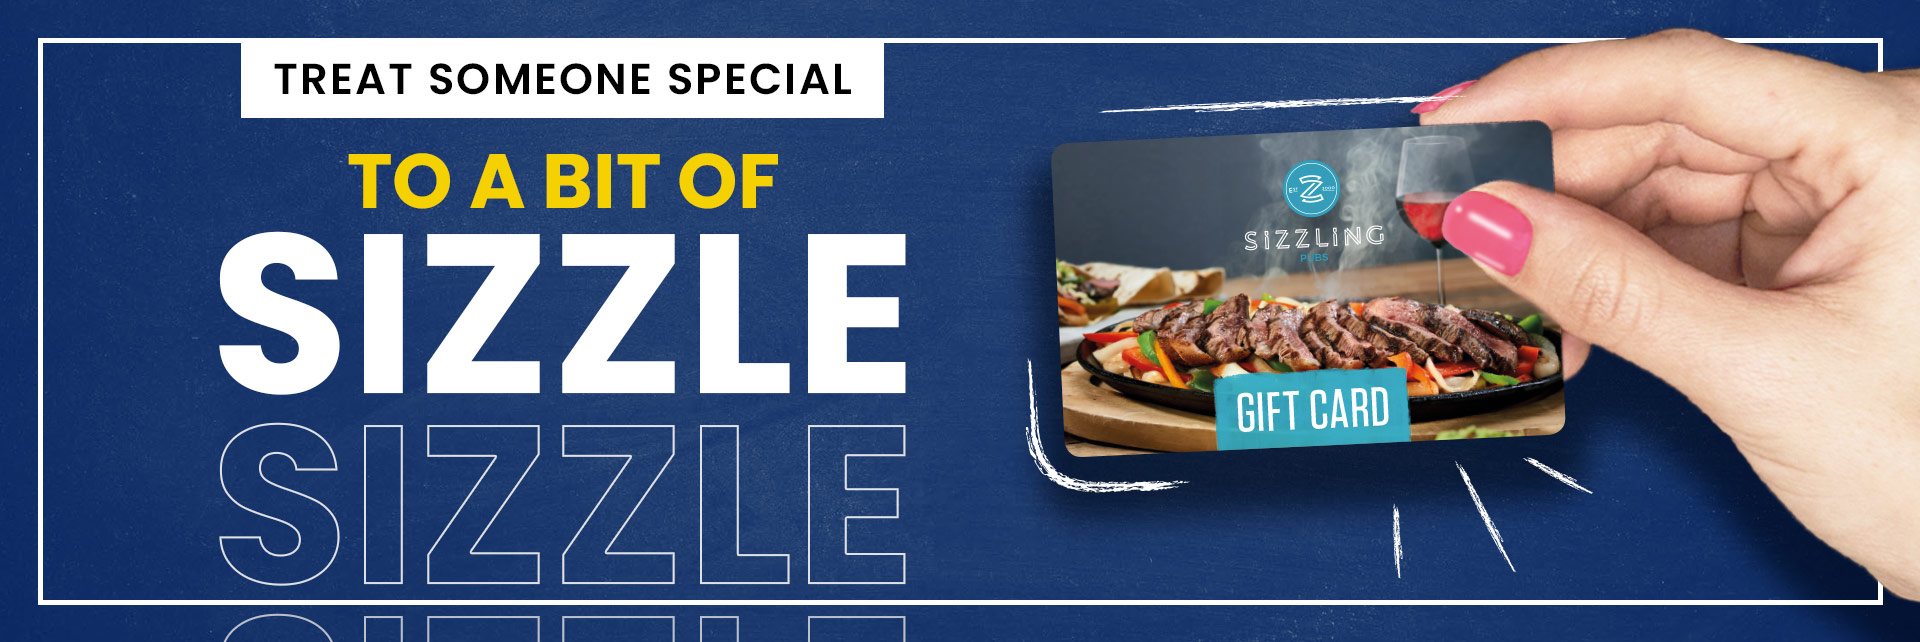 Sizzling Pubs Gift Card at The Argosy in Derby